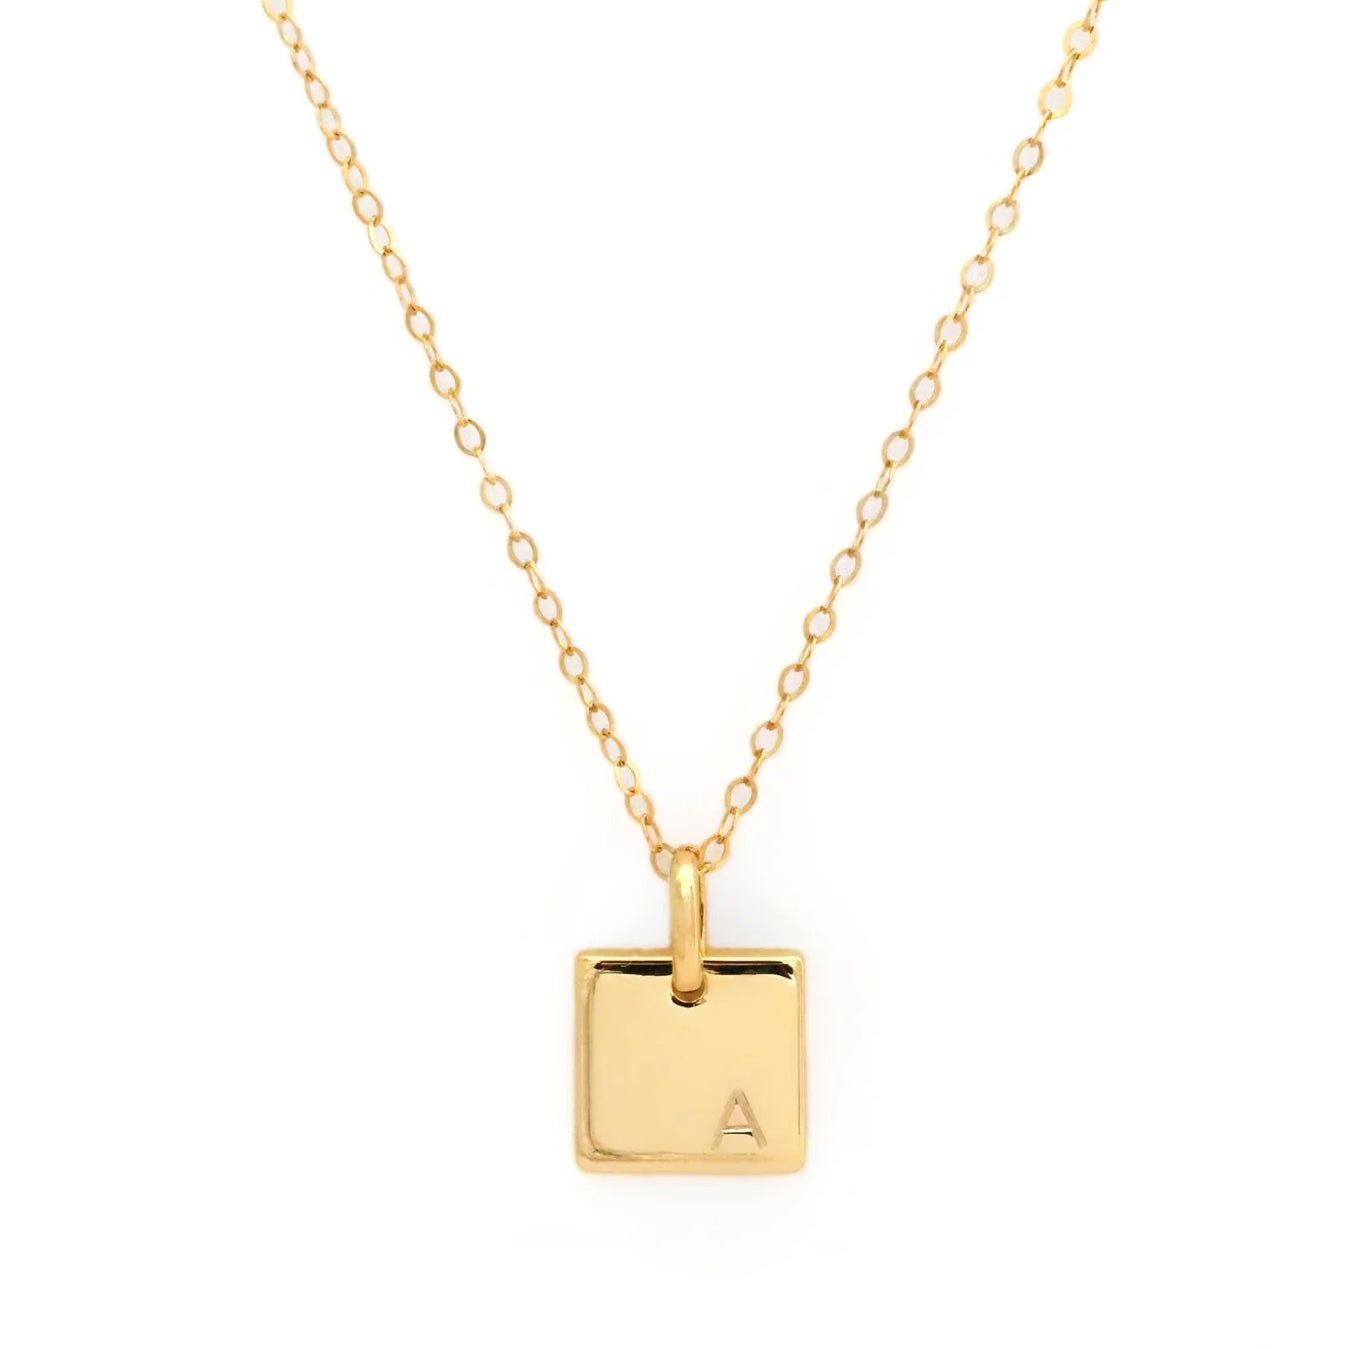 Adorable Monogram Charm Necklace-Ringified Jewelry